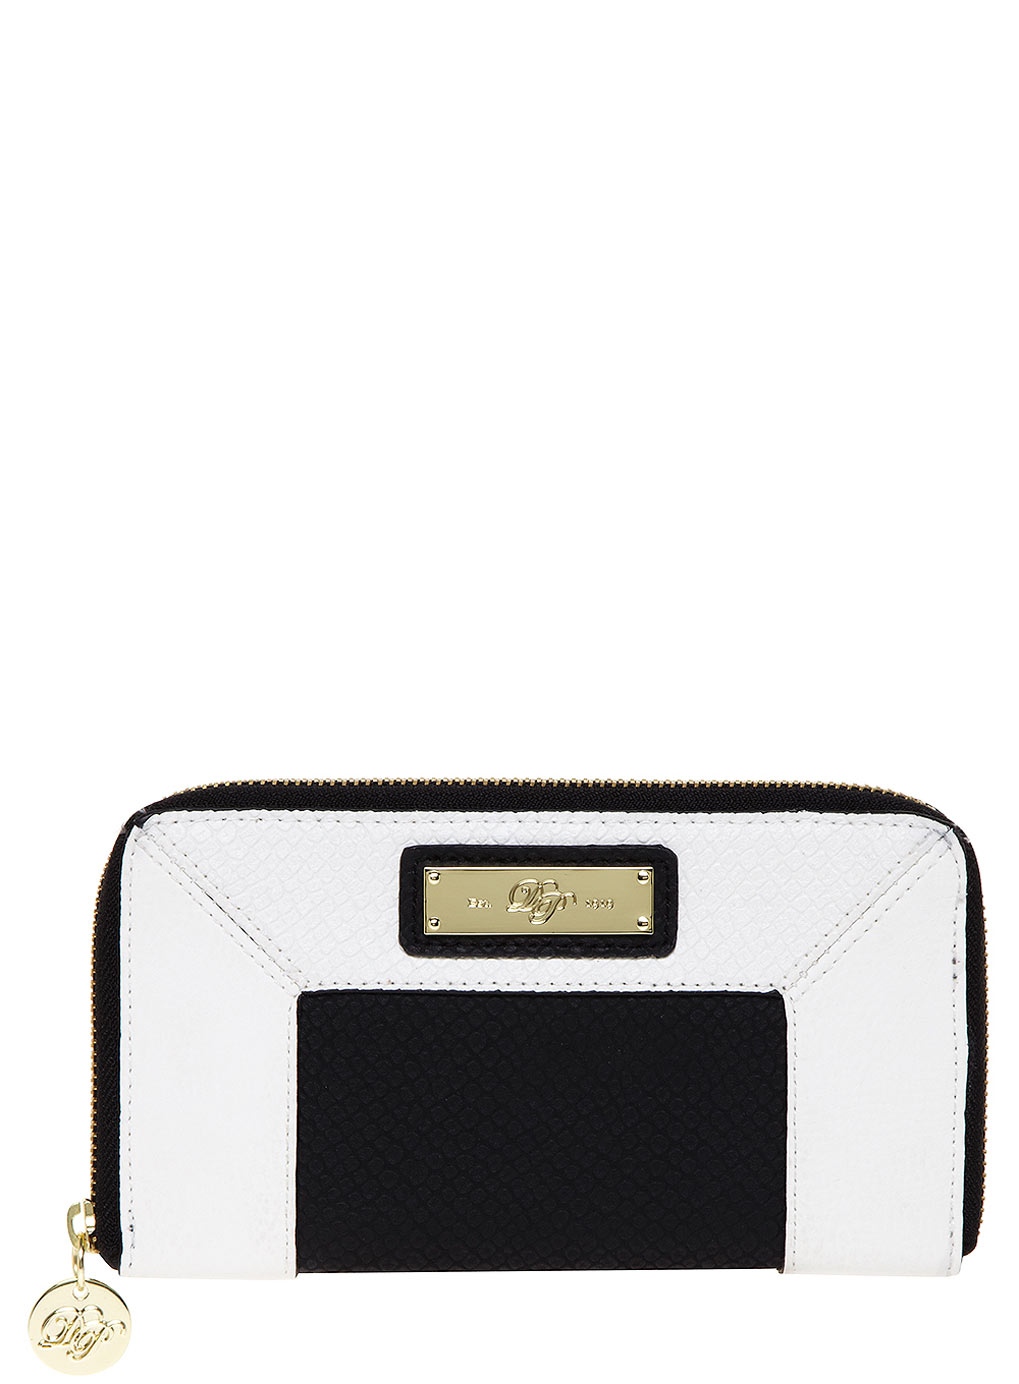 Dorothy Perkins Black and White Zip Purse 18344532